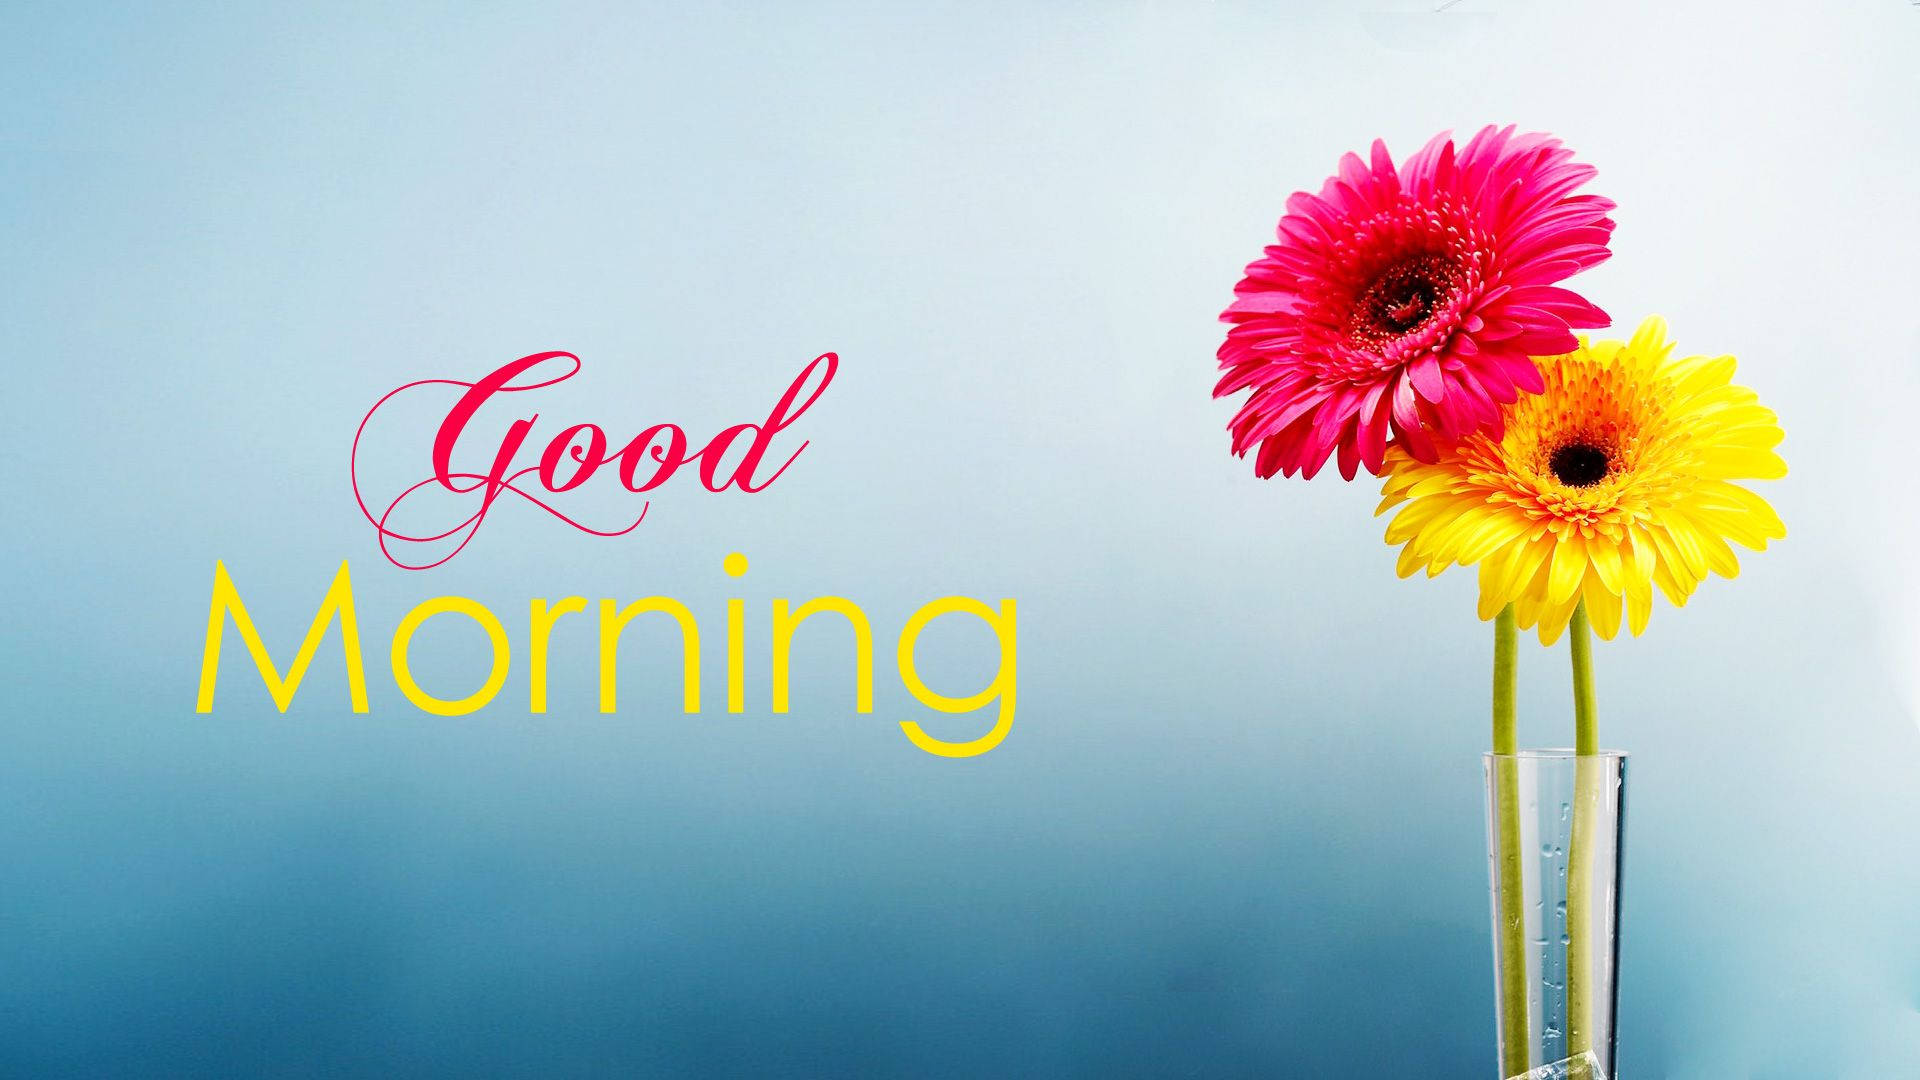 Good Morning Wallpaper With Flowers, Full Hd 1920x1080 Gm Image Background